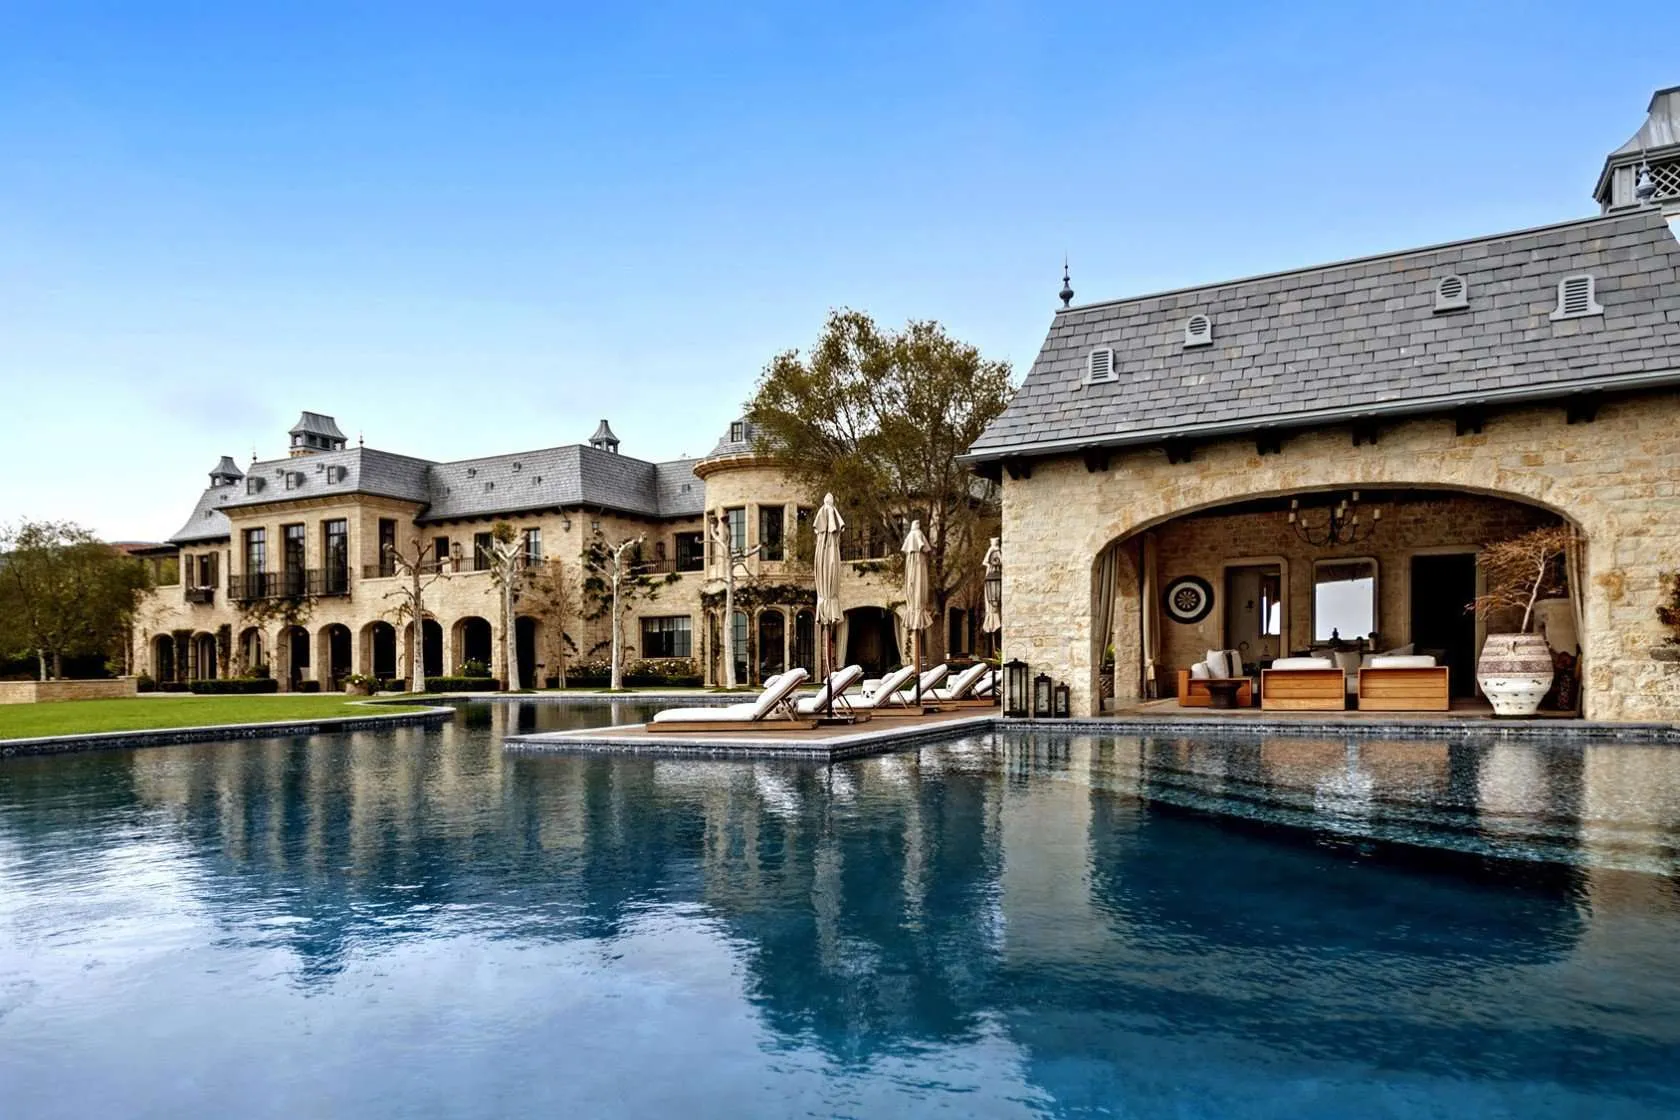 Dr Dres 40 million French Chateau in Brentwood